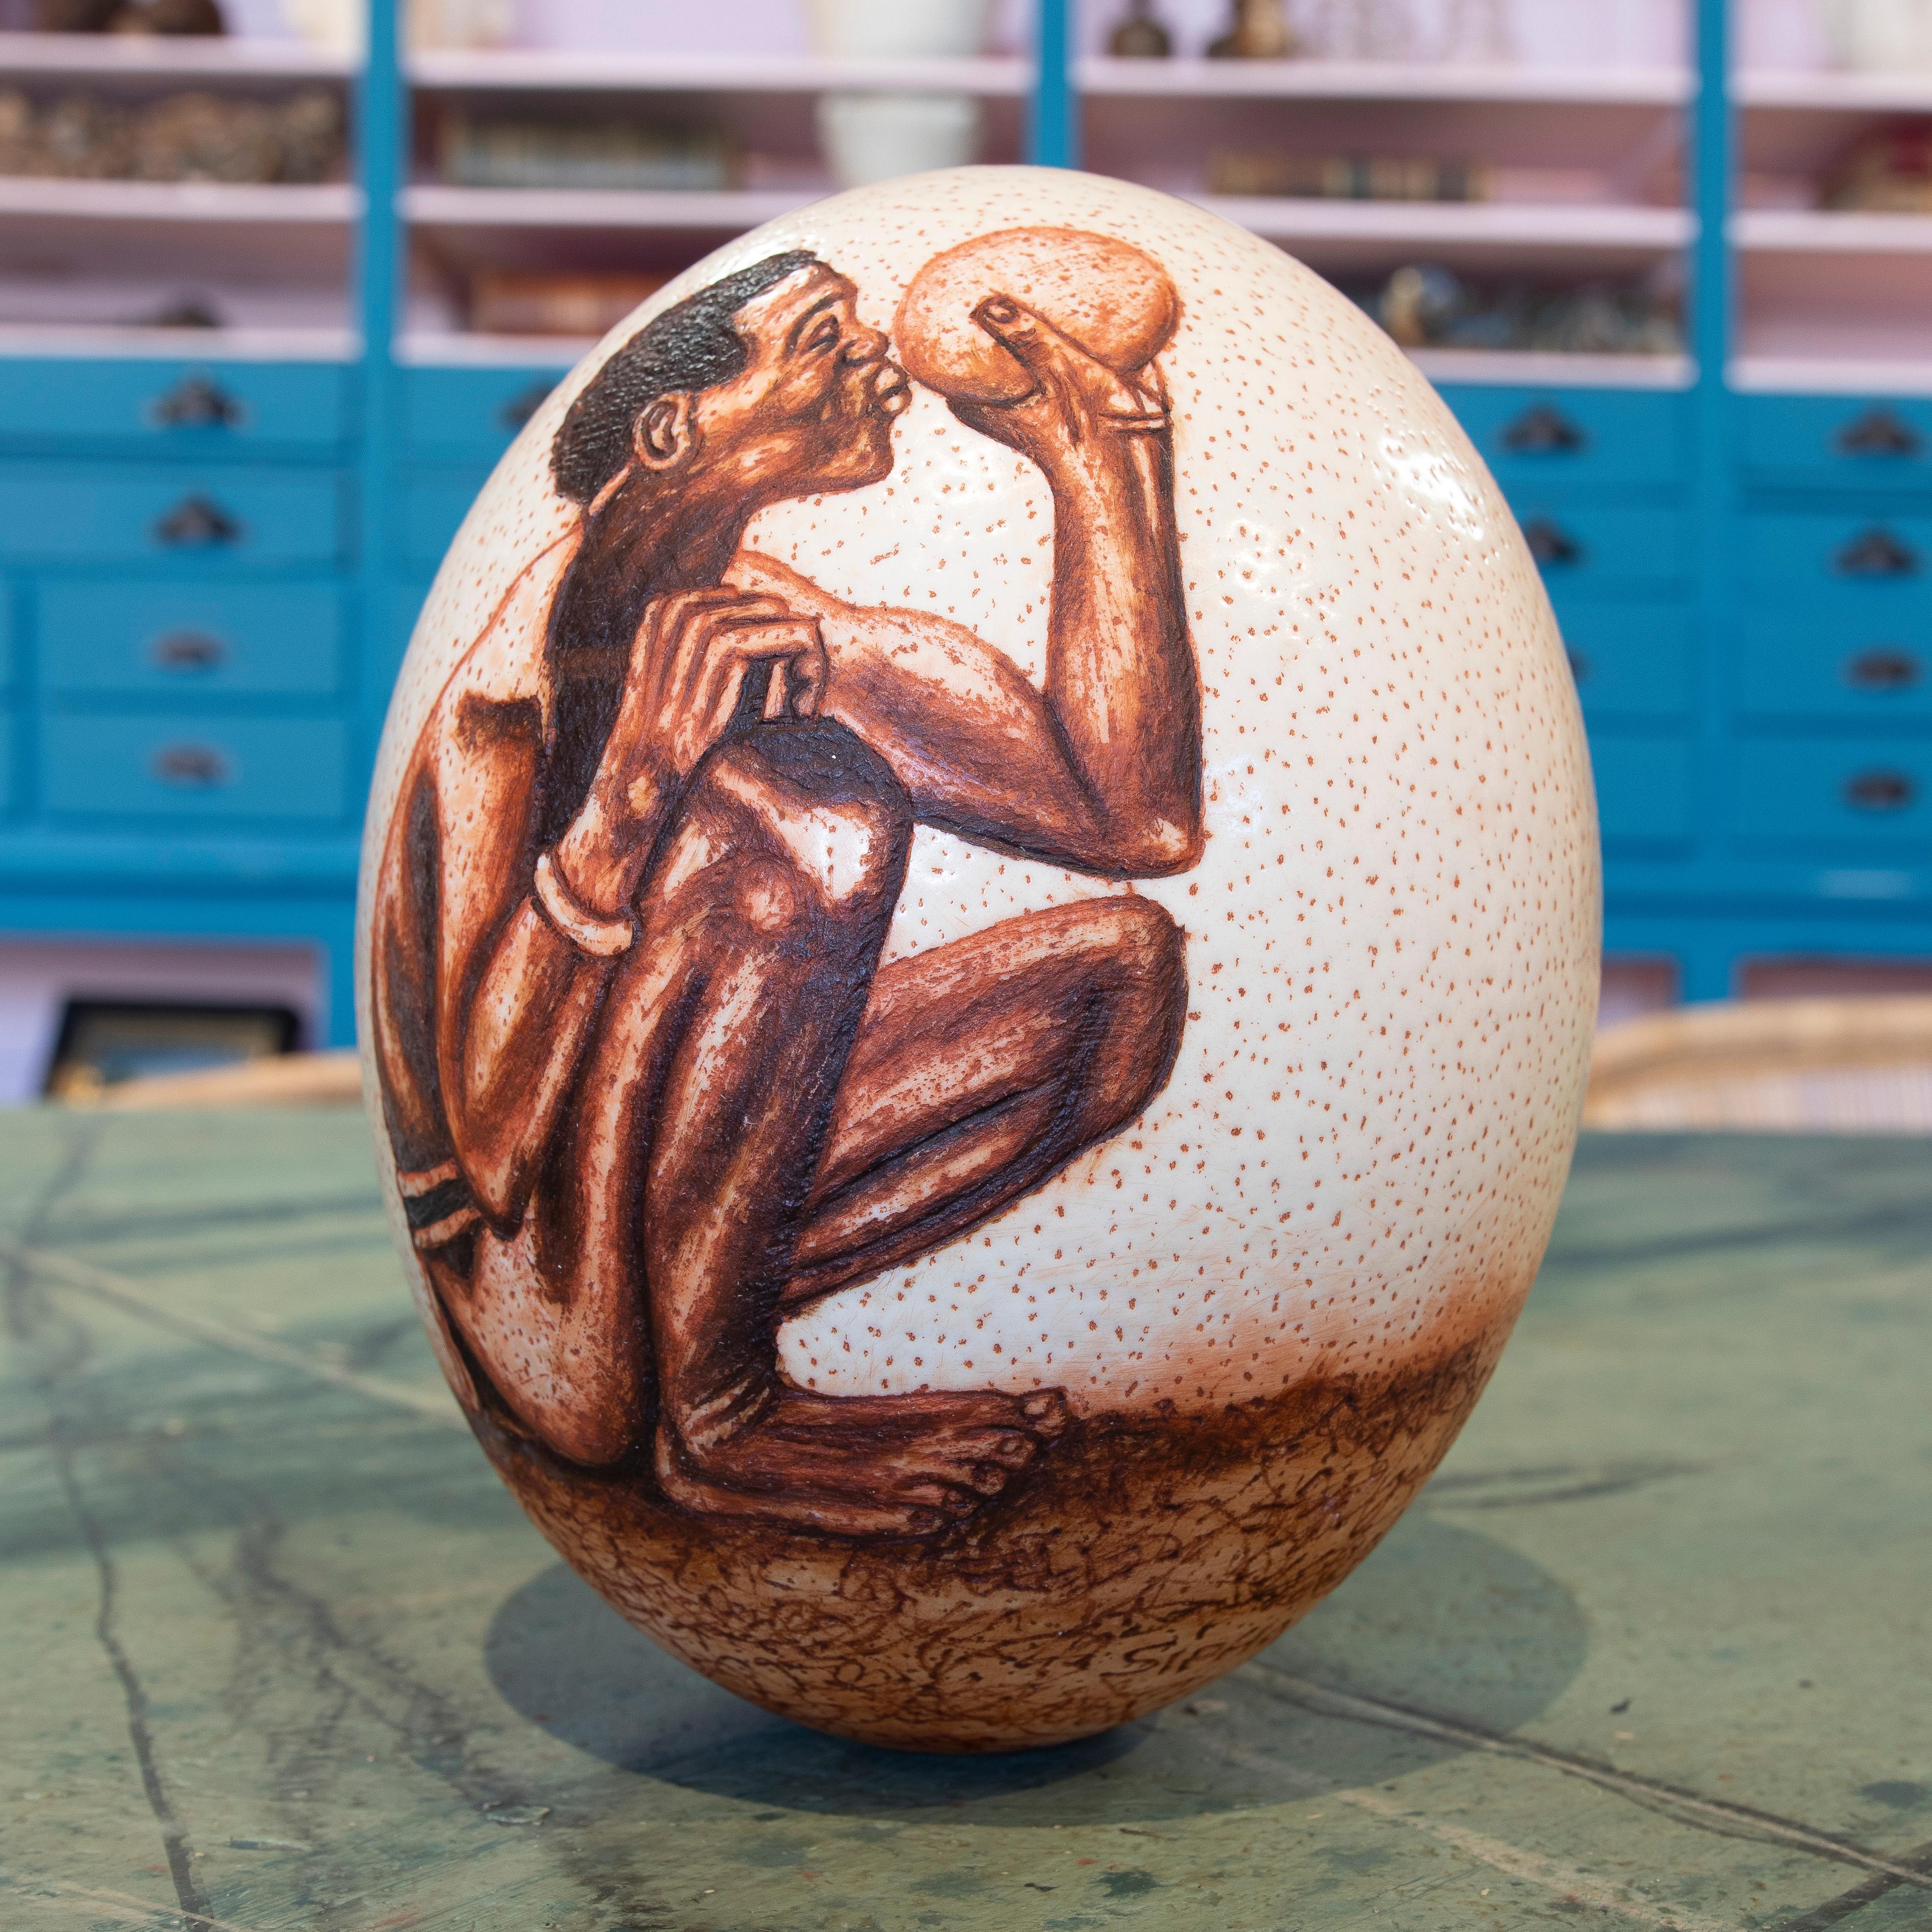 Original 1950s South African scrimshaw ostrich egg by late chief Sipho Ndlvu.